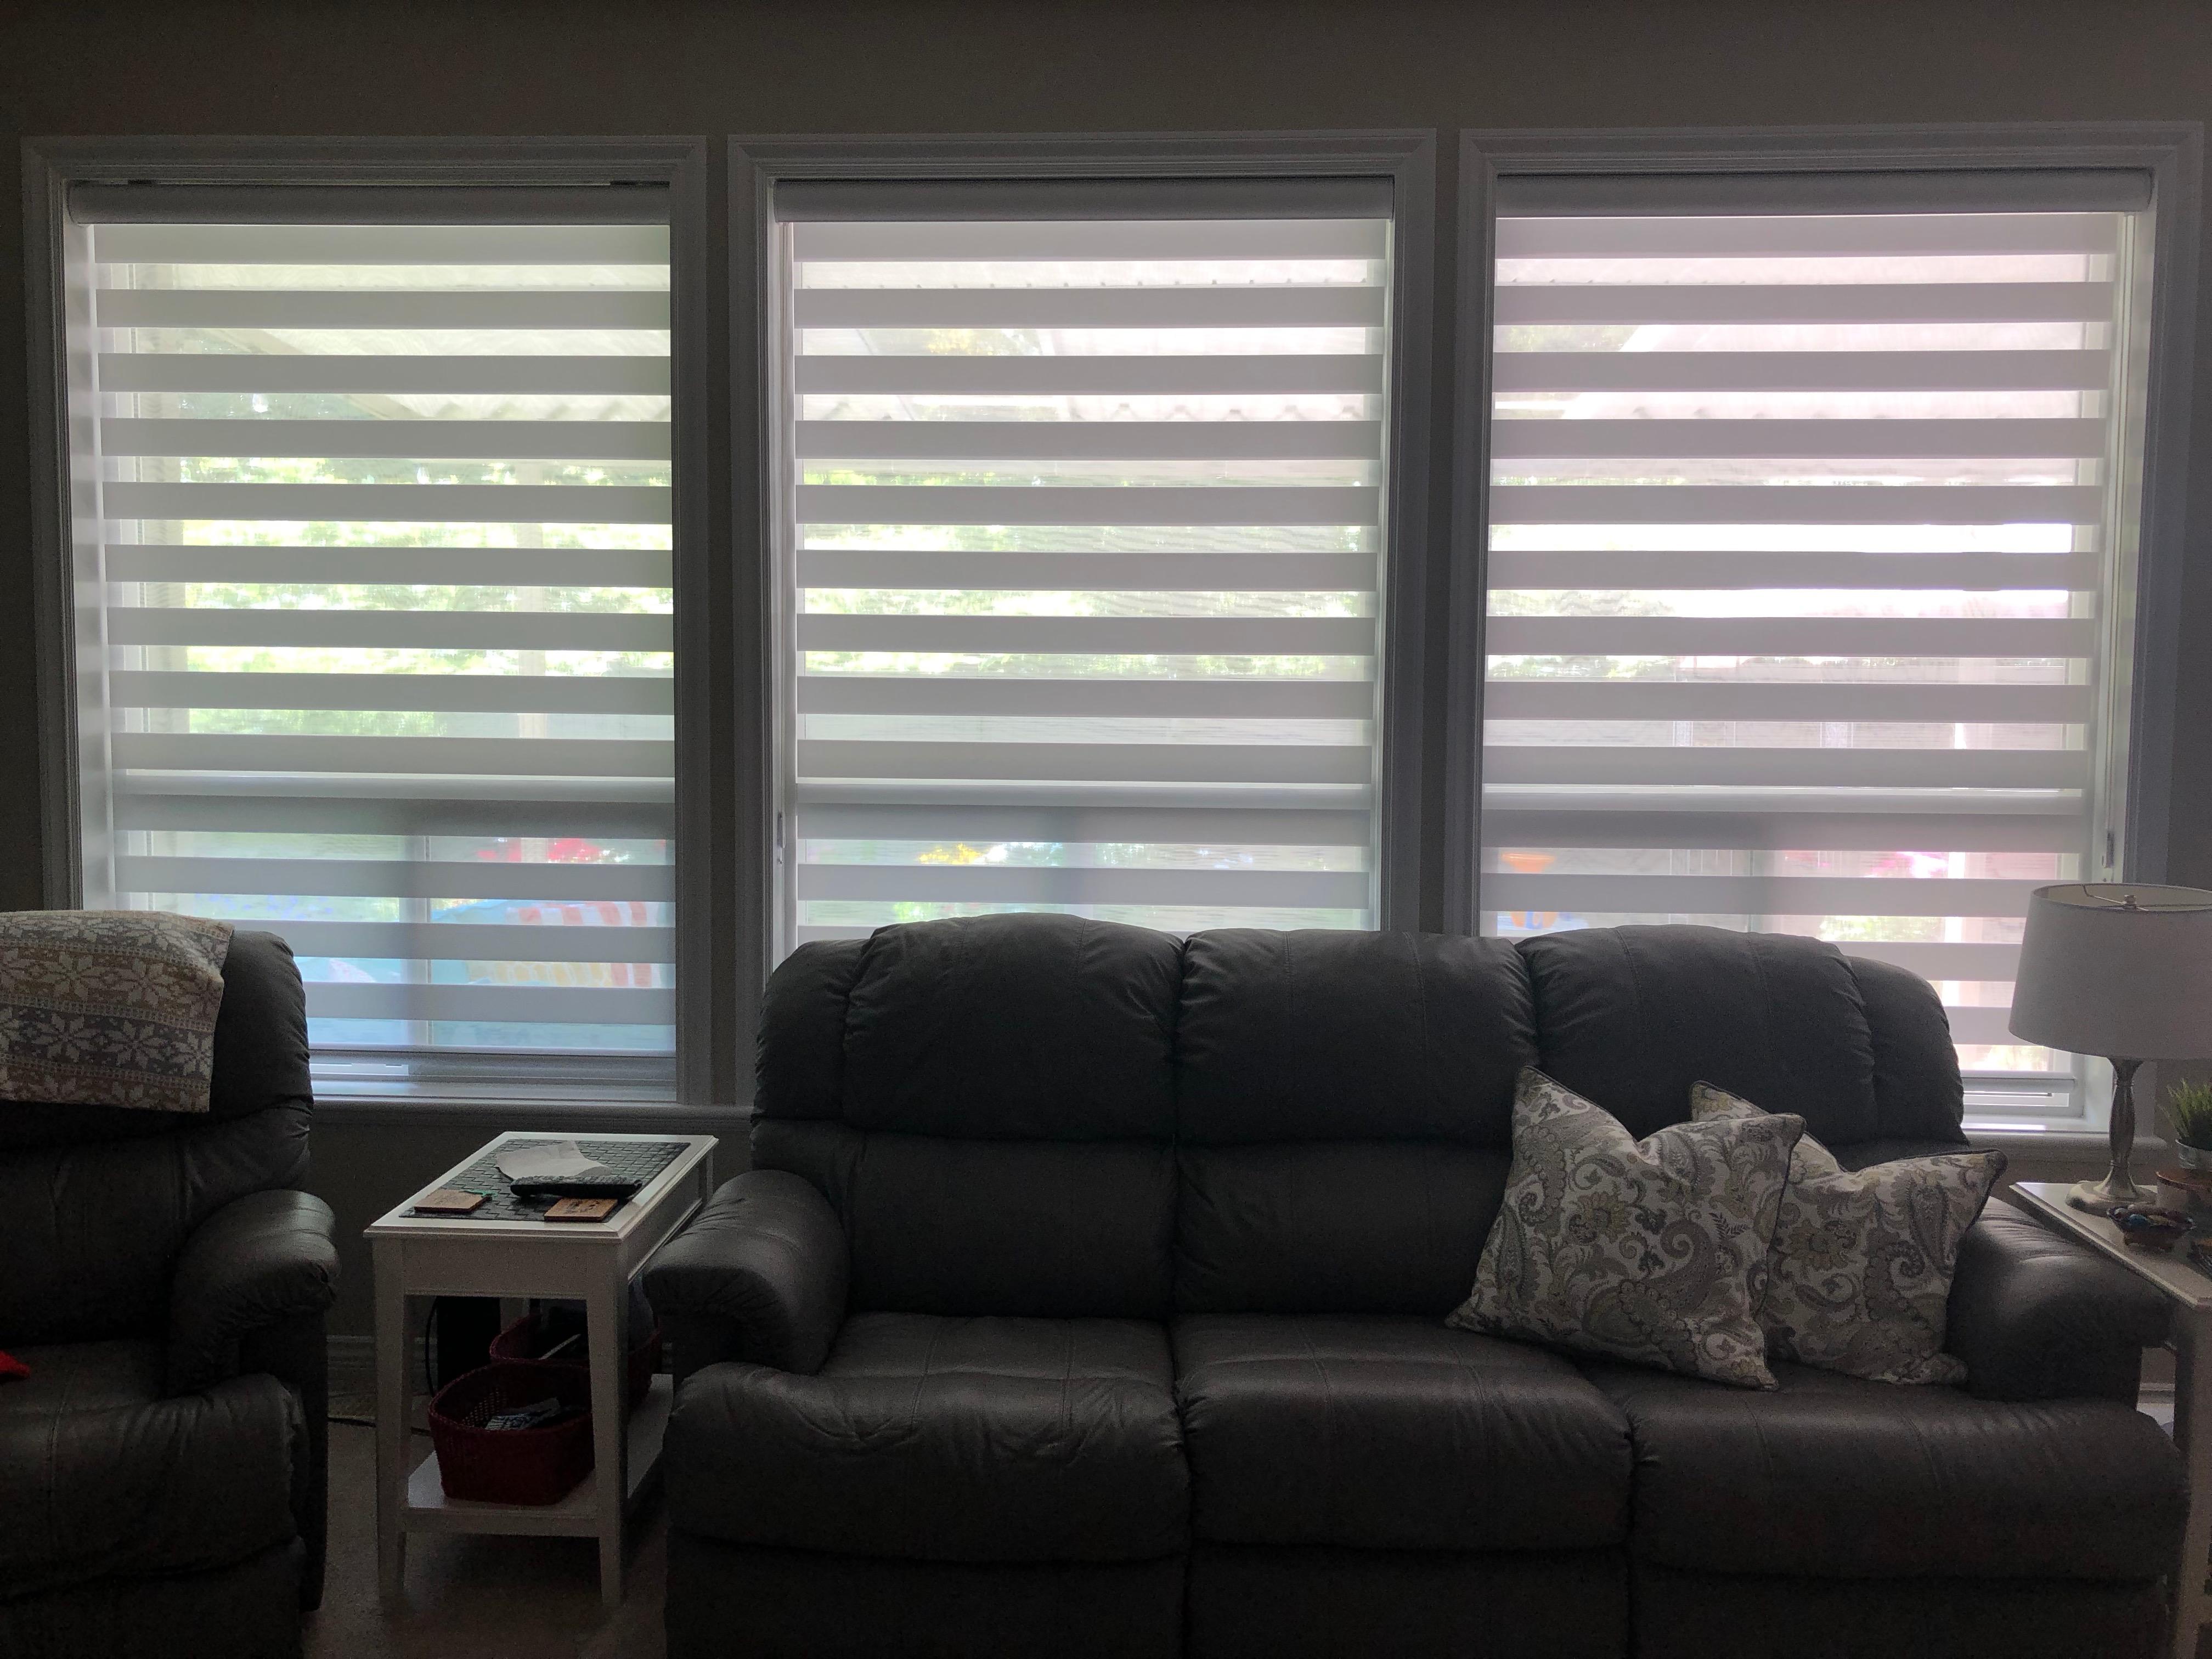 Dual Shades offer flexibility when it comes to how much or how little light you want to allow into y Budget Blinds of Chilliwack, Hope and Harrison Chilliwack (604)824-0375